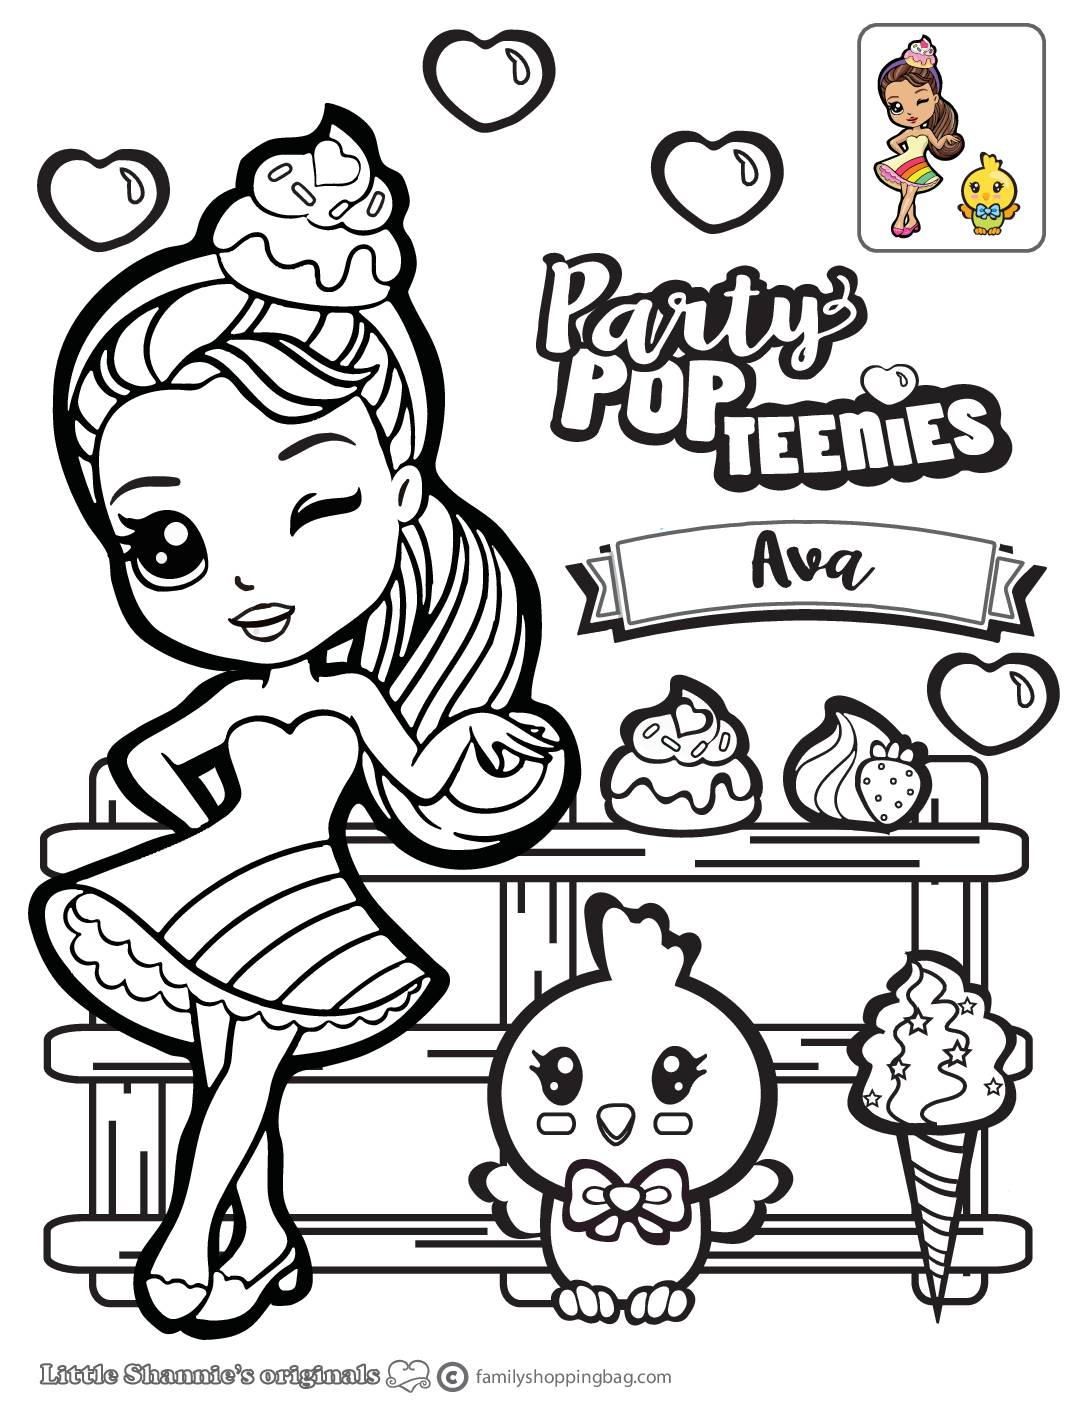 Free Printable Party Pop Teenies Coloring Pages And More Lil